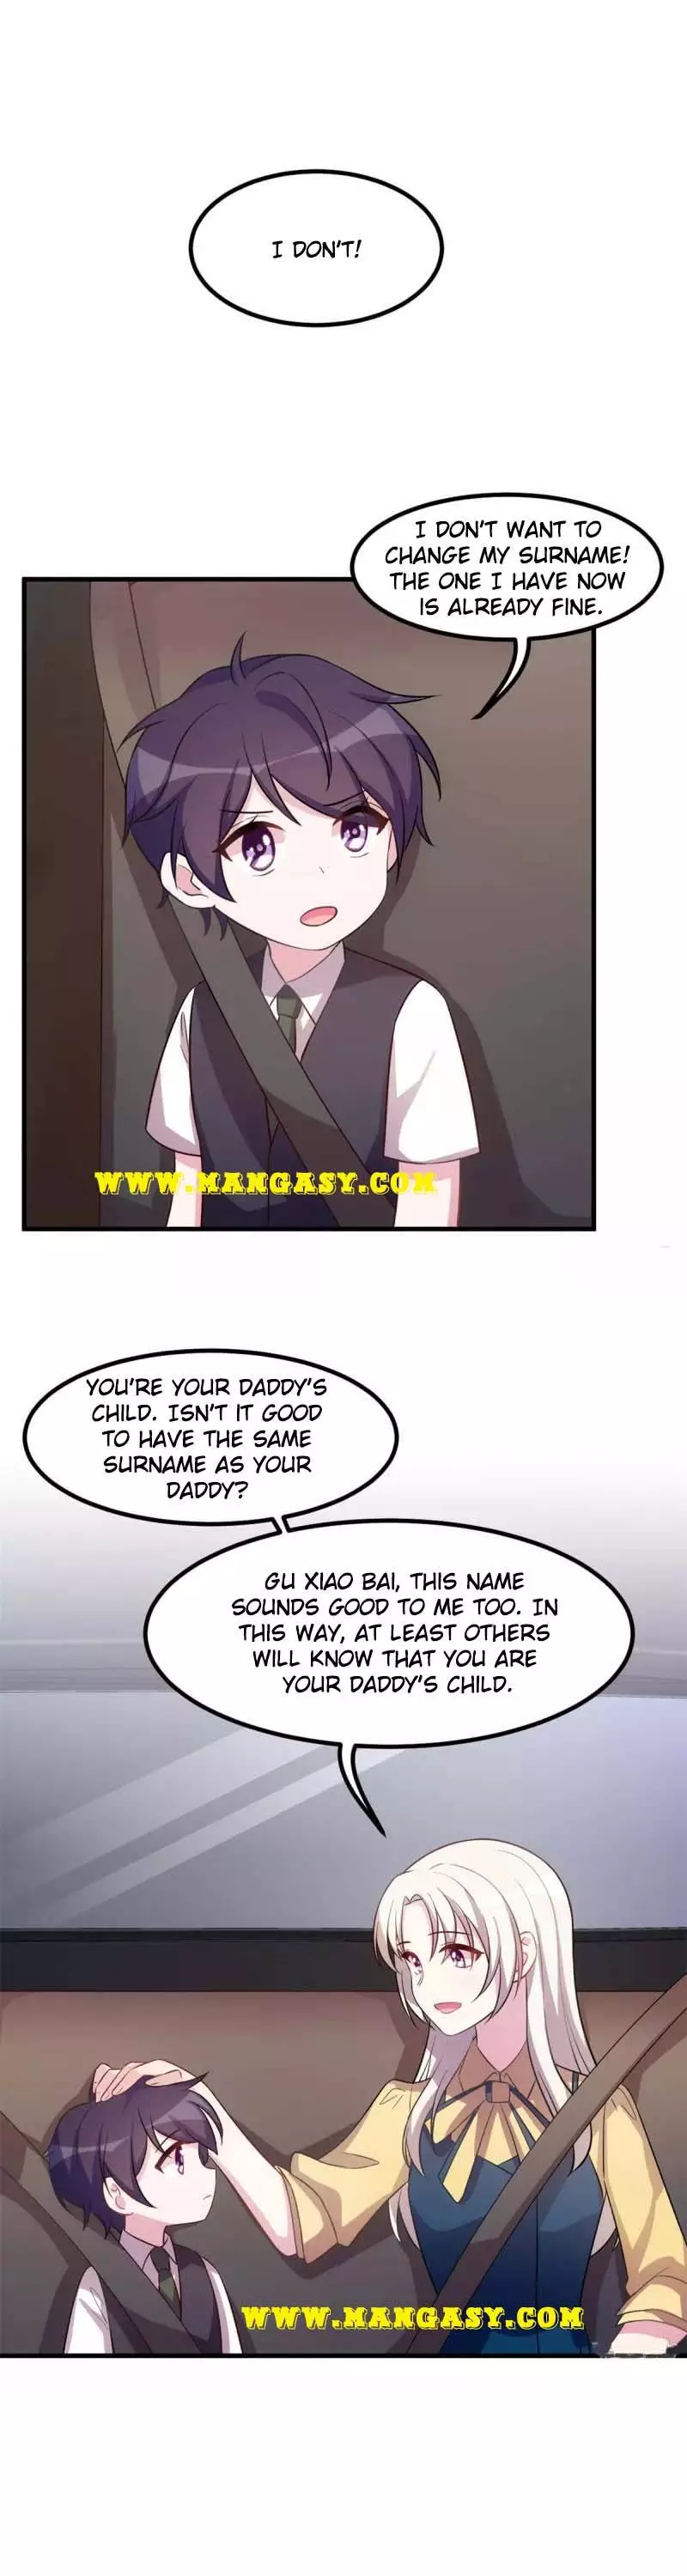 Xiao Bai’S Father Is A Wonderful Person - 175 page 8-98959359